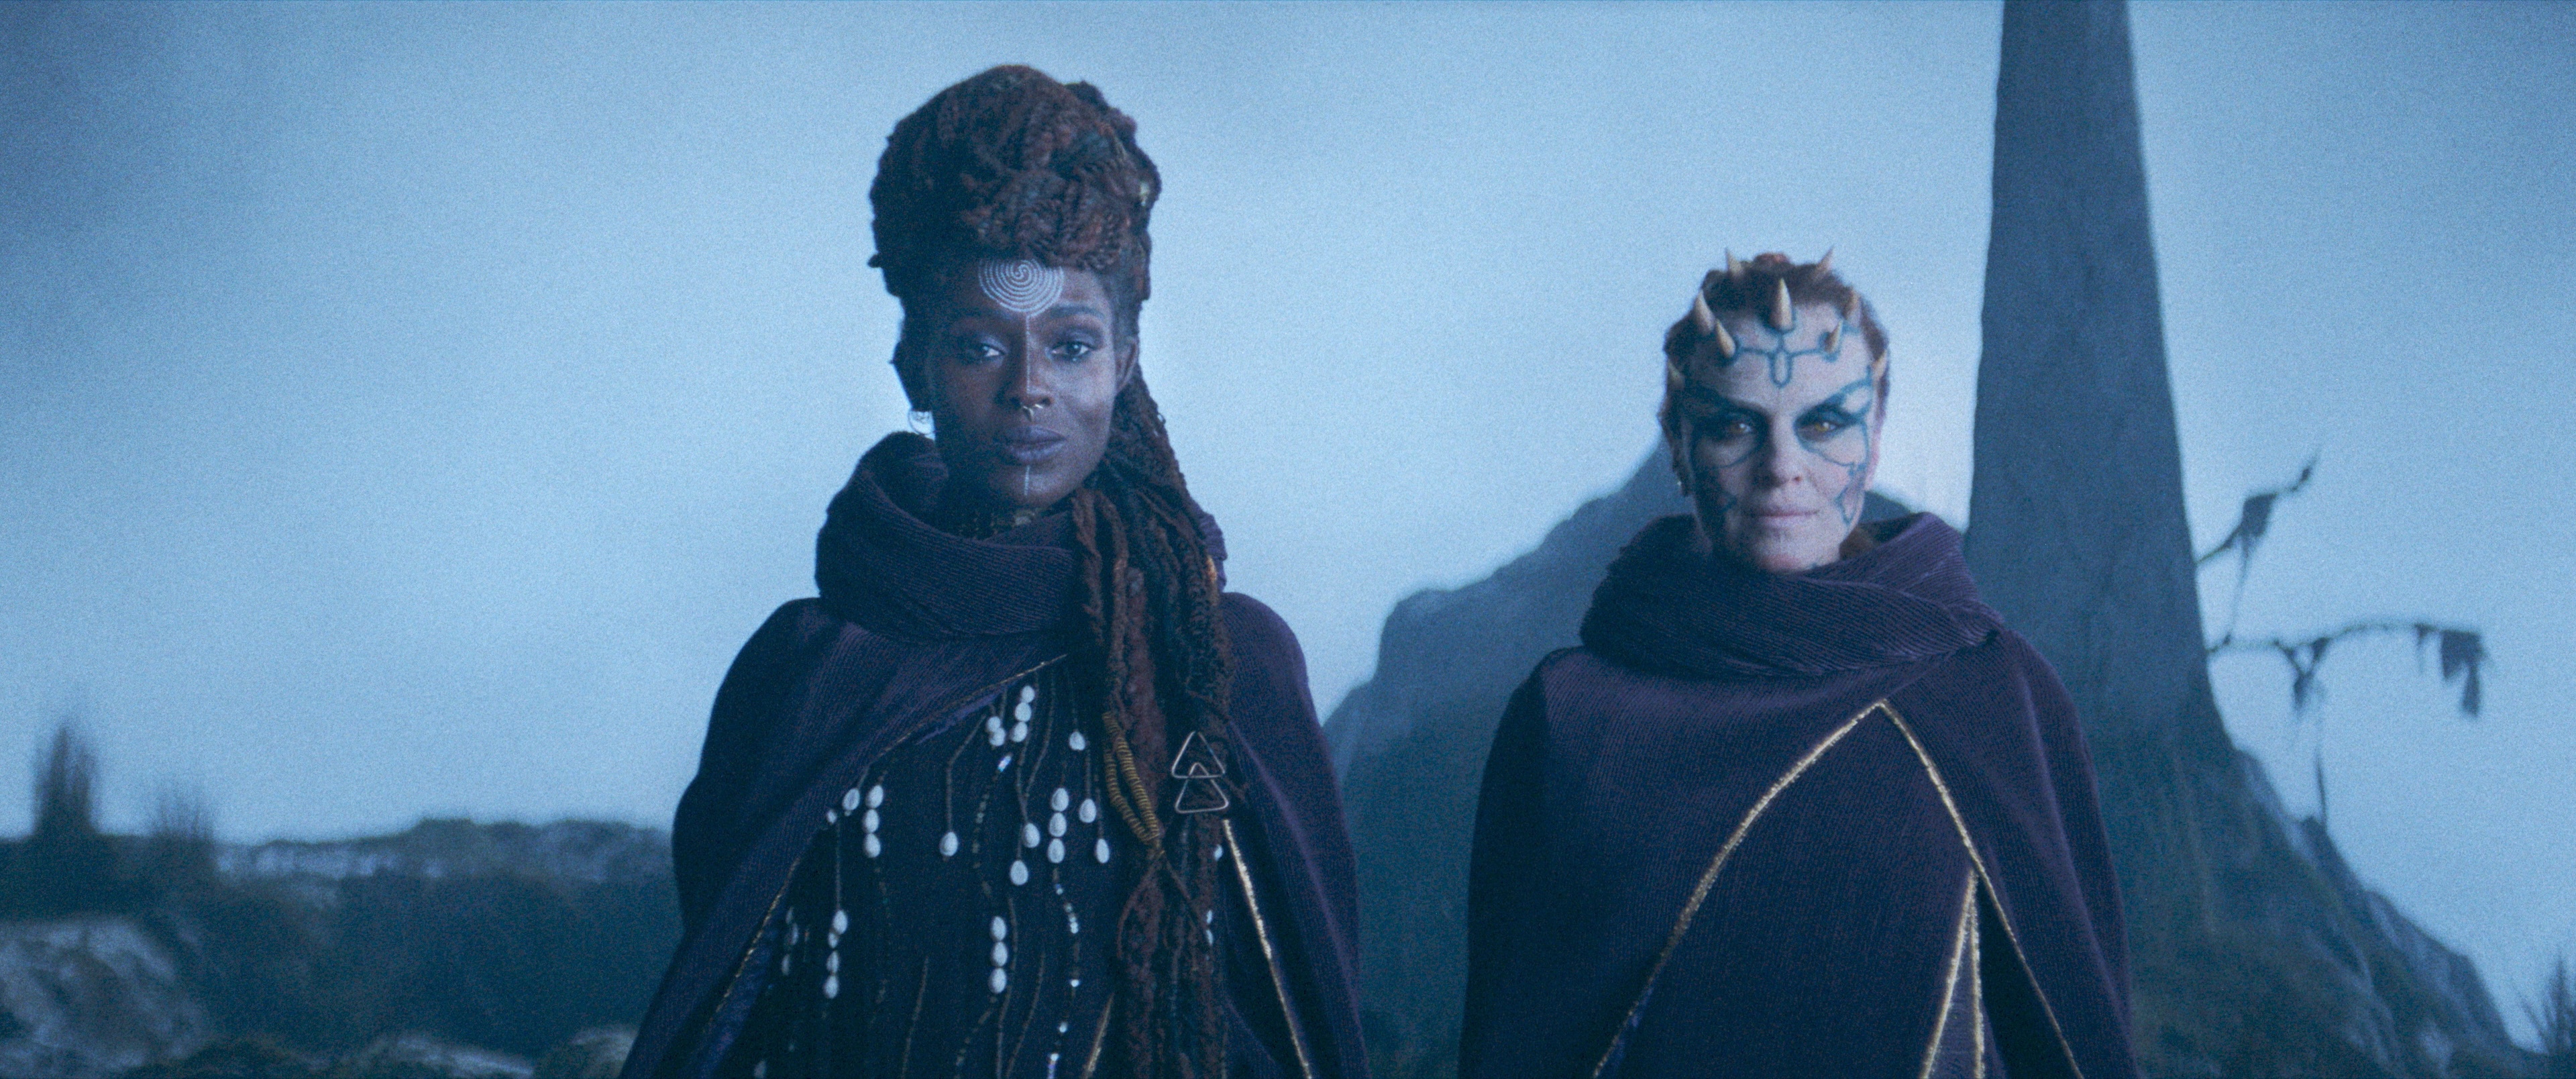 (L-R): Mother Aniseya (Jodie Turner-Smith) and Koril (Margarita Levieva) in The Acolyte. They stand abreast, smiling slightly, in elaborate robes on a stark cliff face.